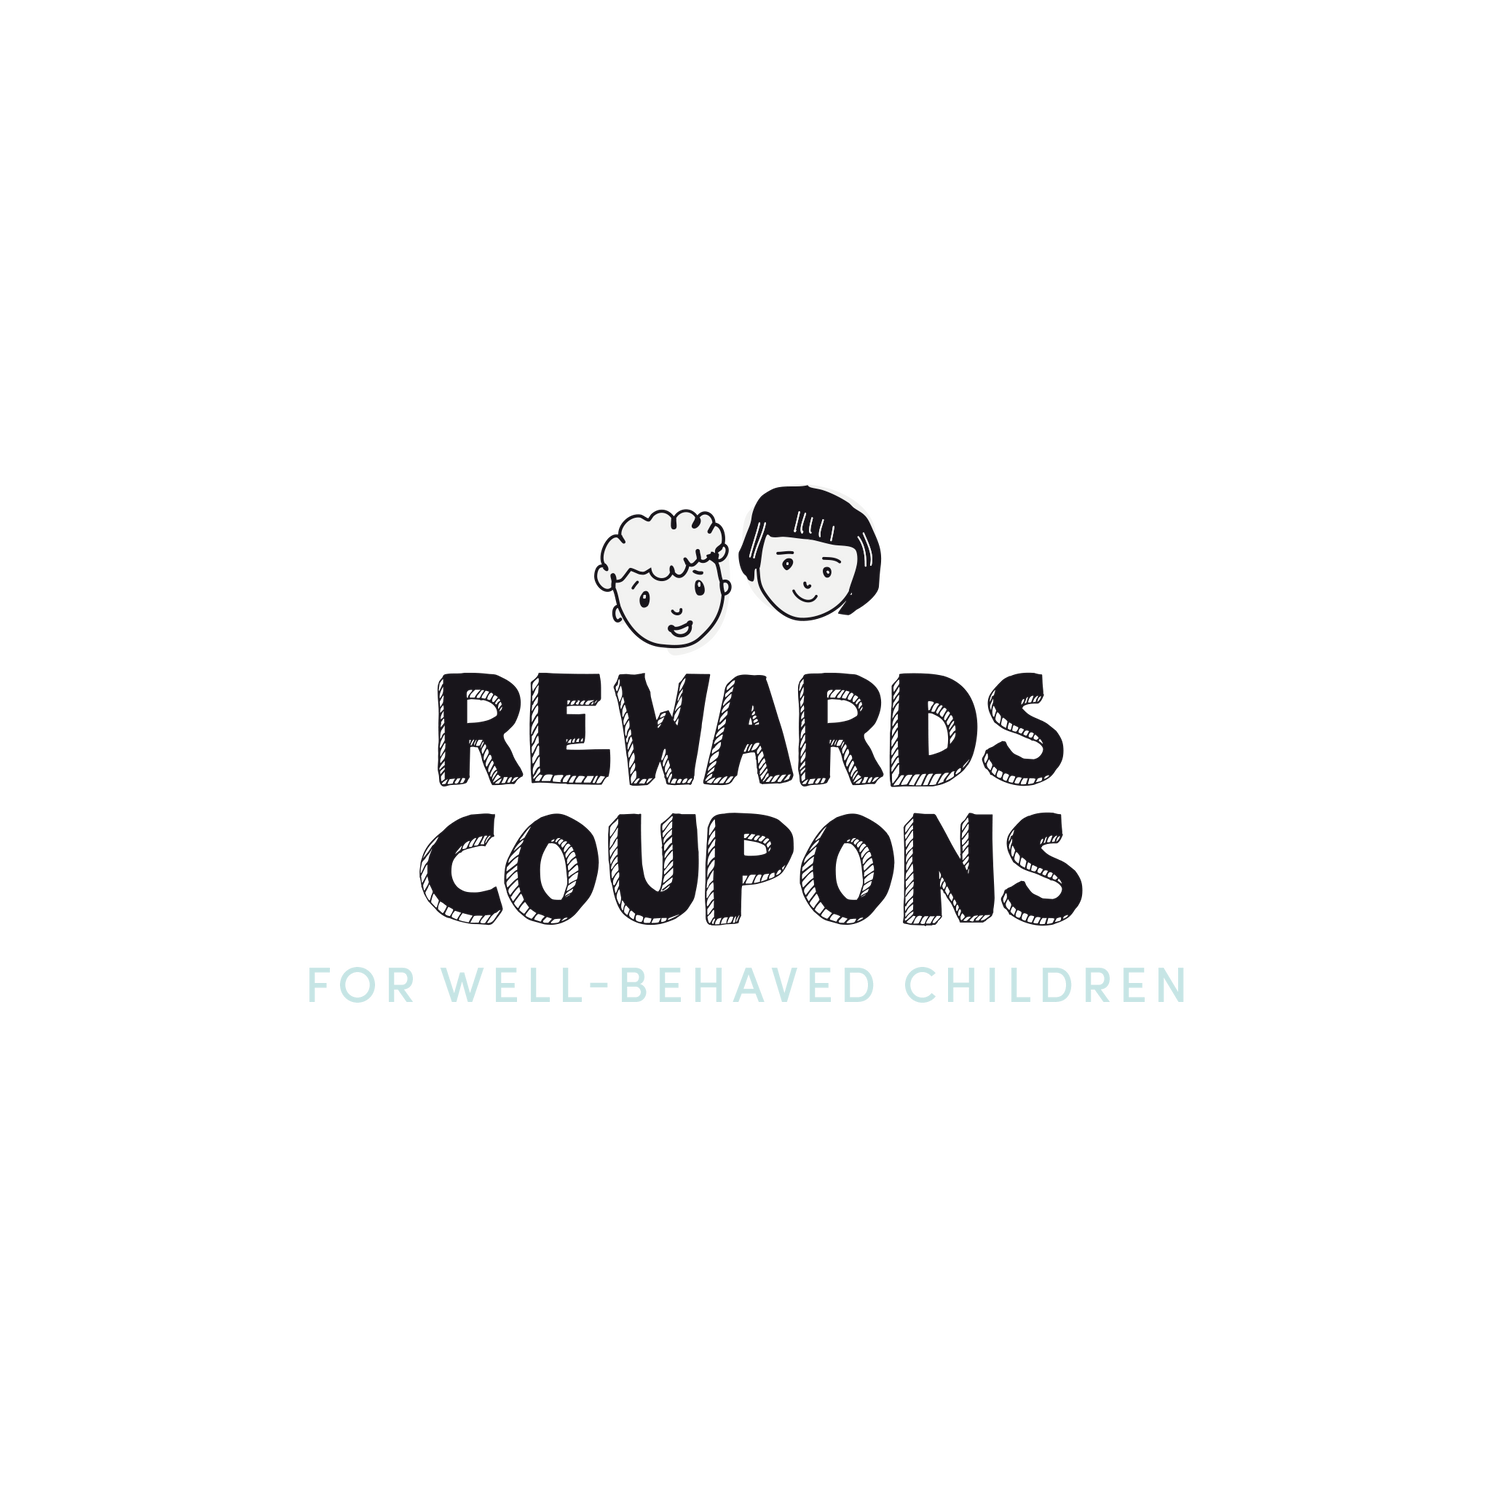 English version of the logo of the rewards coupons for well-behaved children made by Les Belles Combines